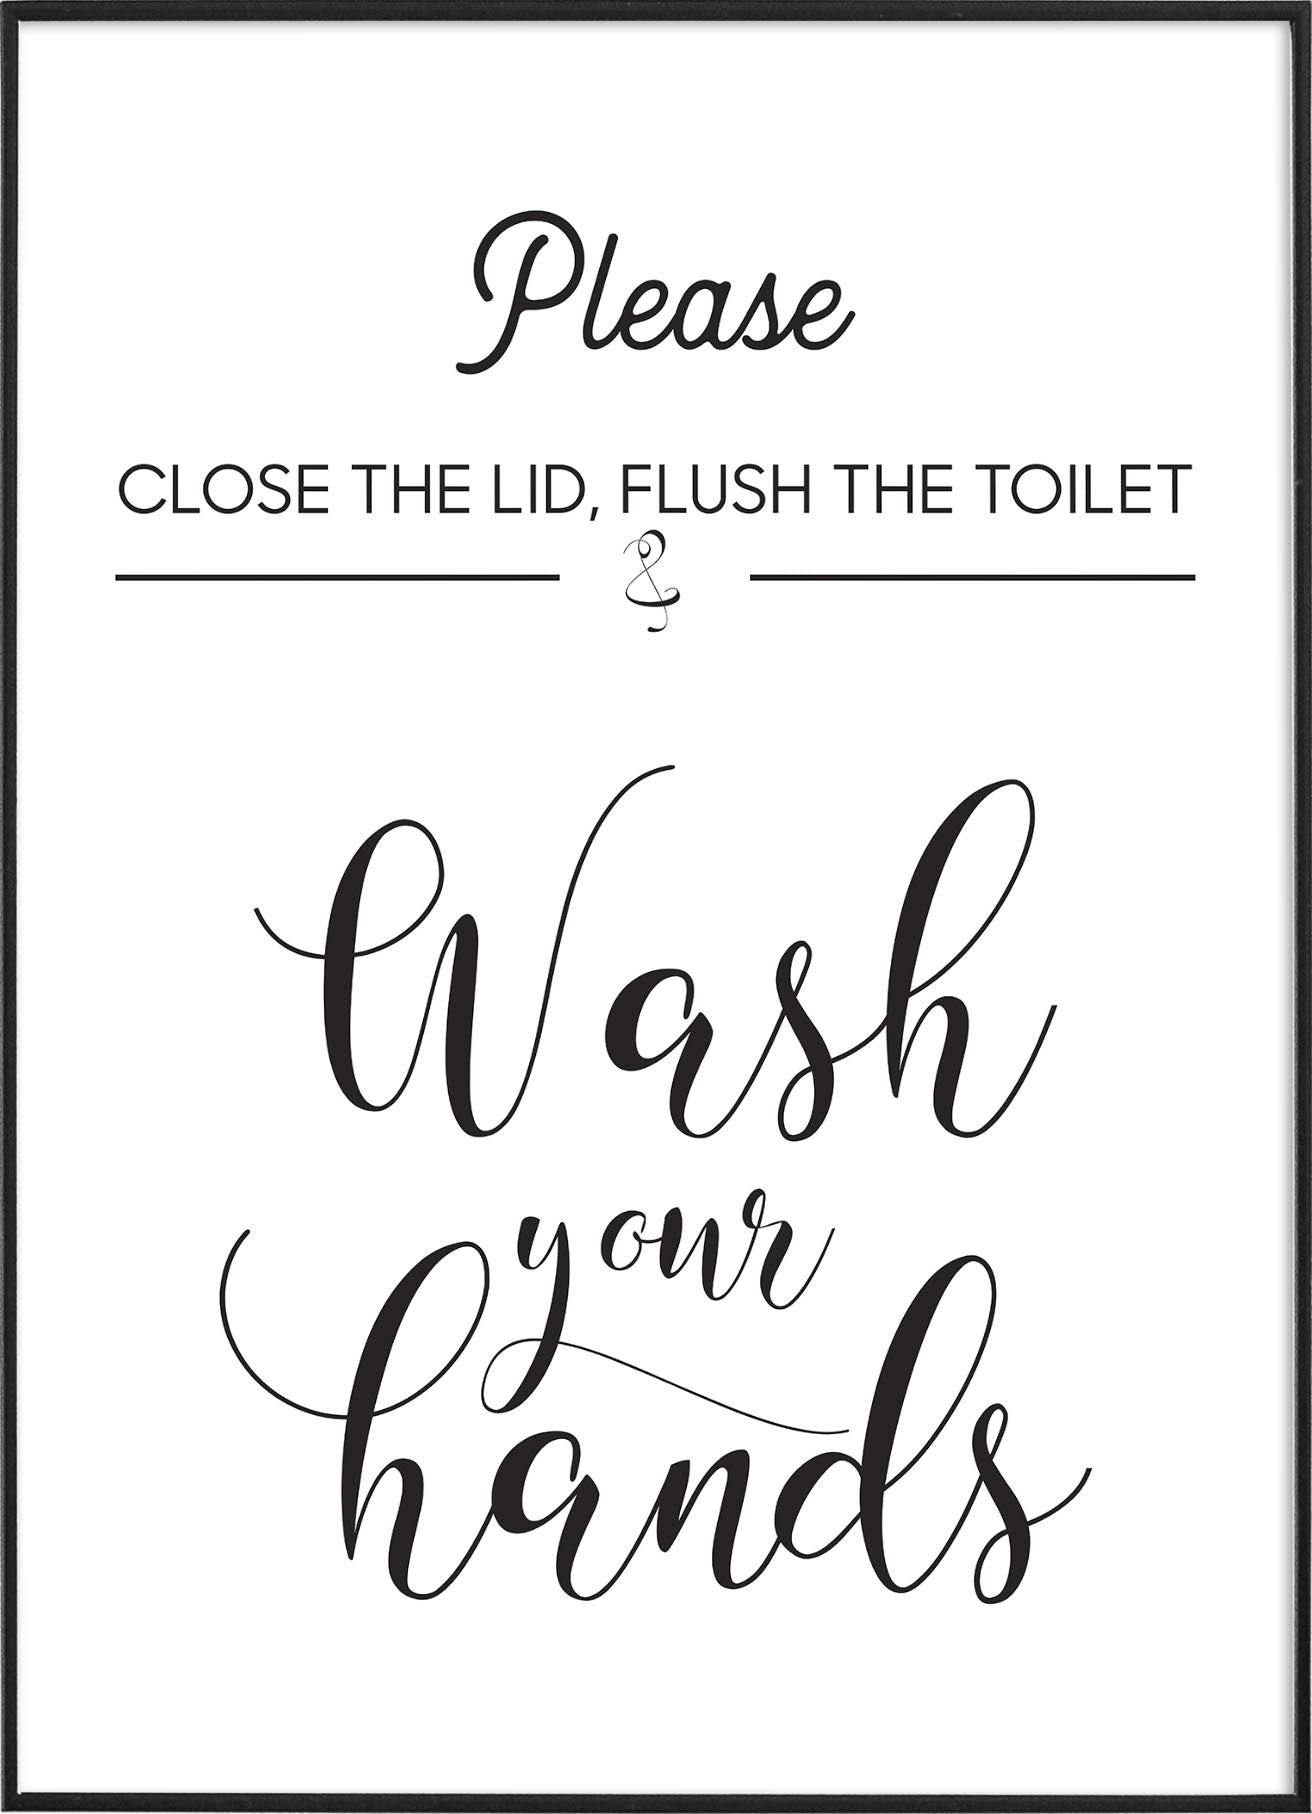 A black and white typography poster with instructions to close the toilet lid, flush the toilet, and wash your hands.